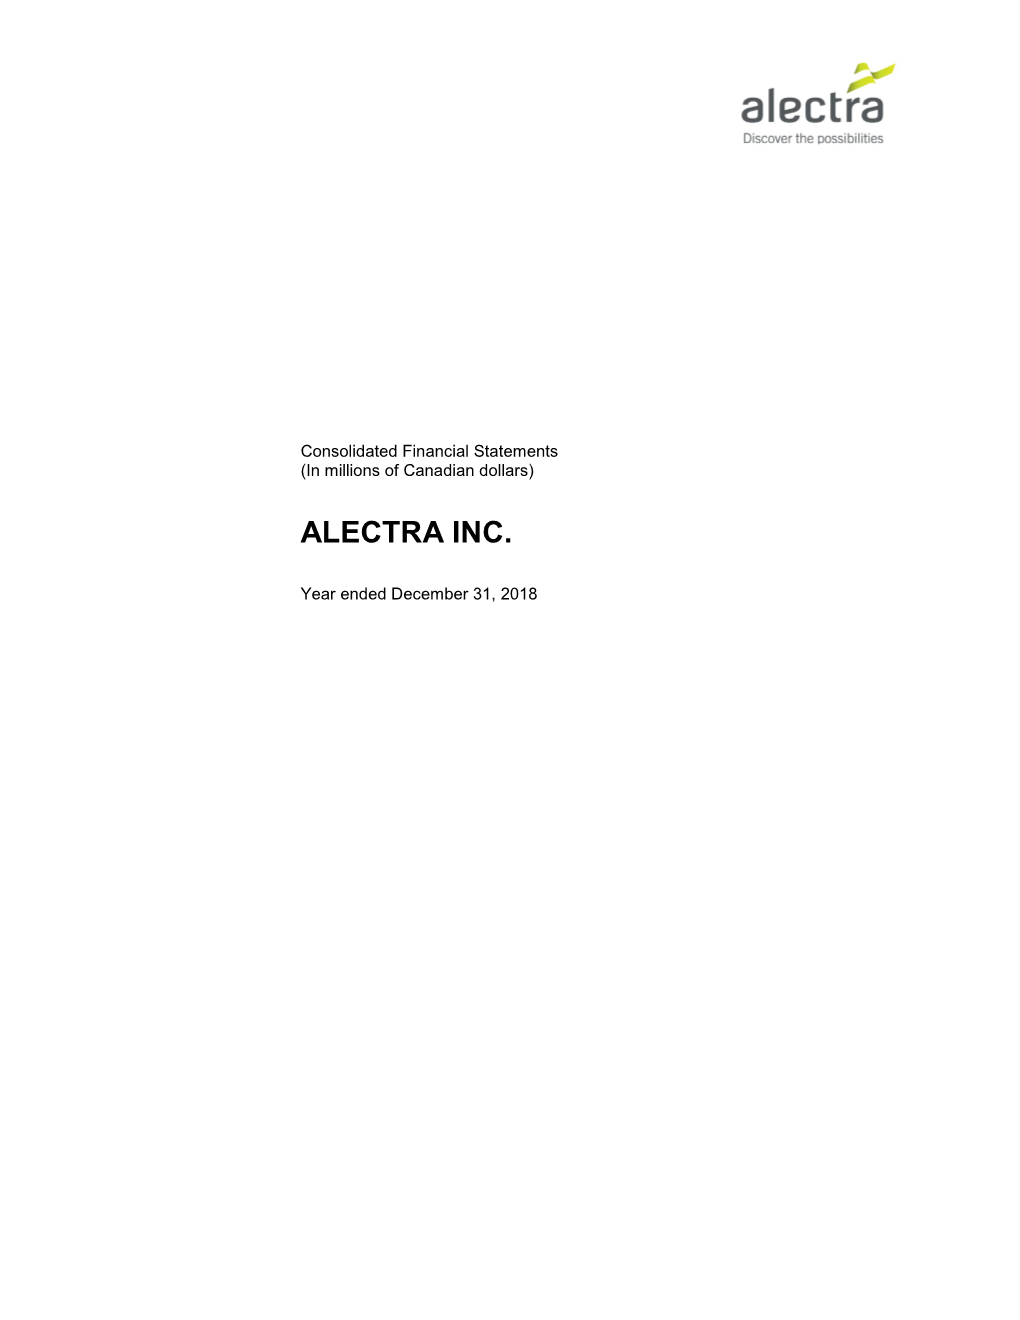 Alectra Inc. 2018 Consolidated Financial Statements